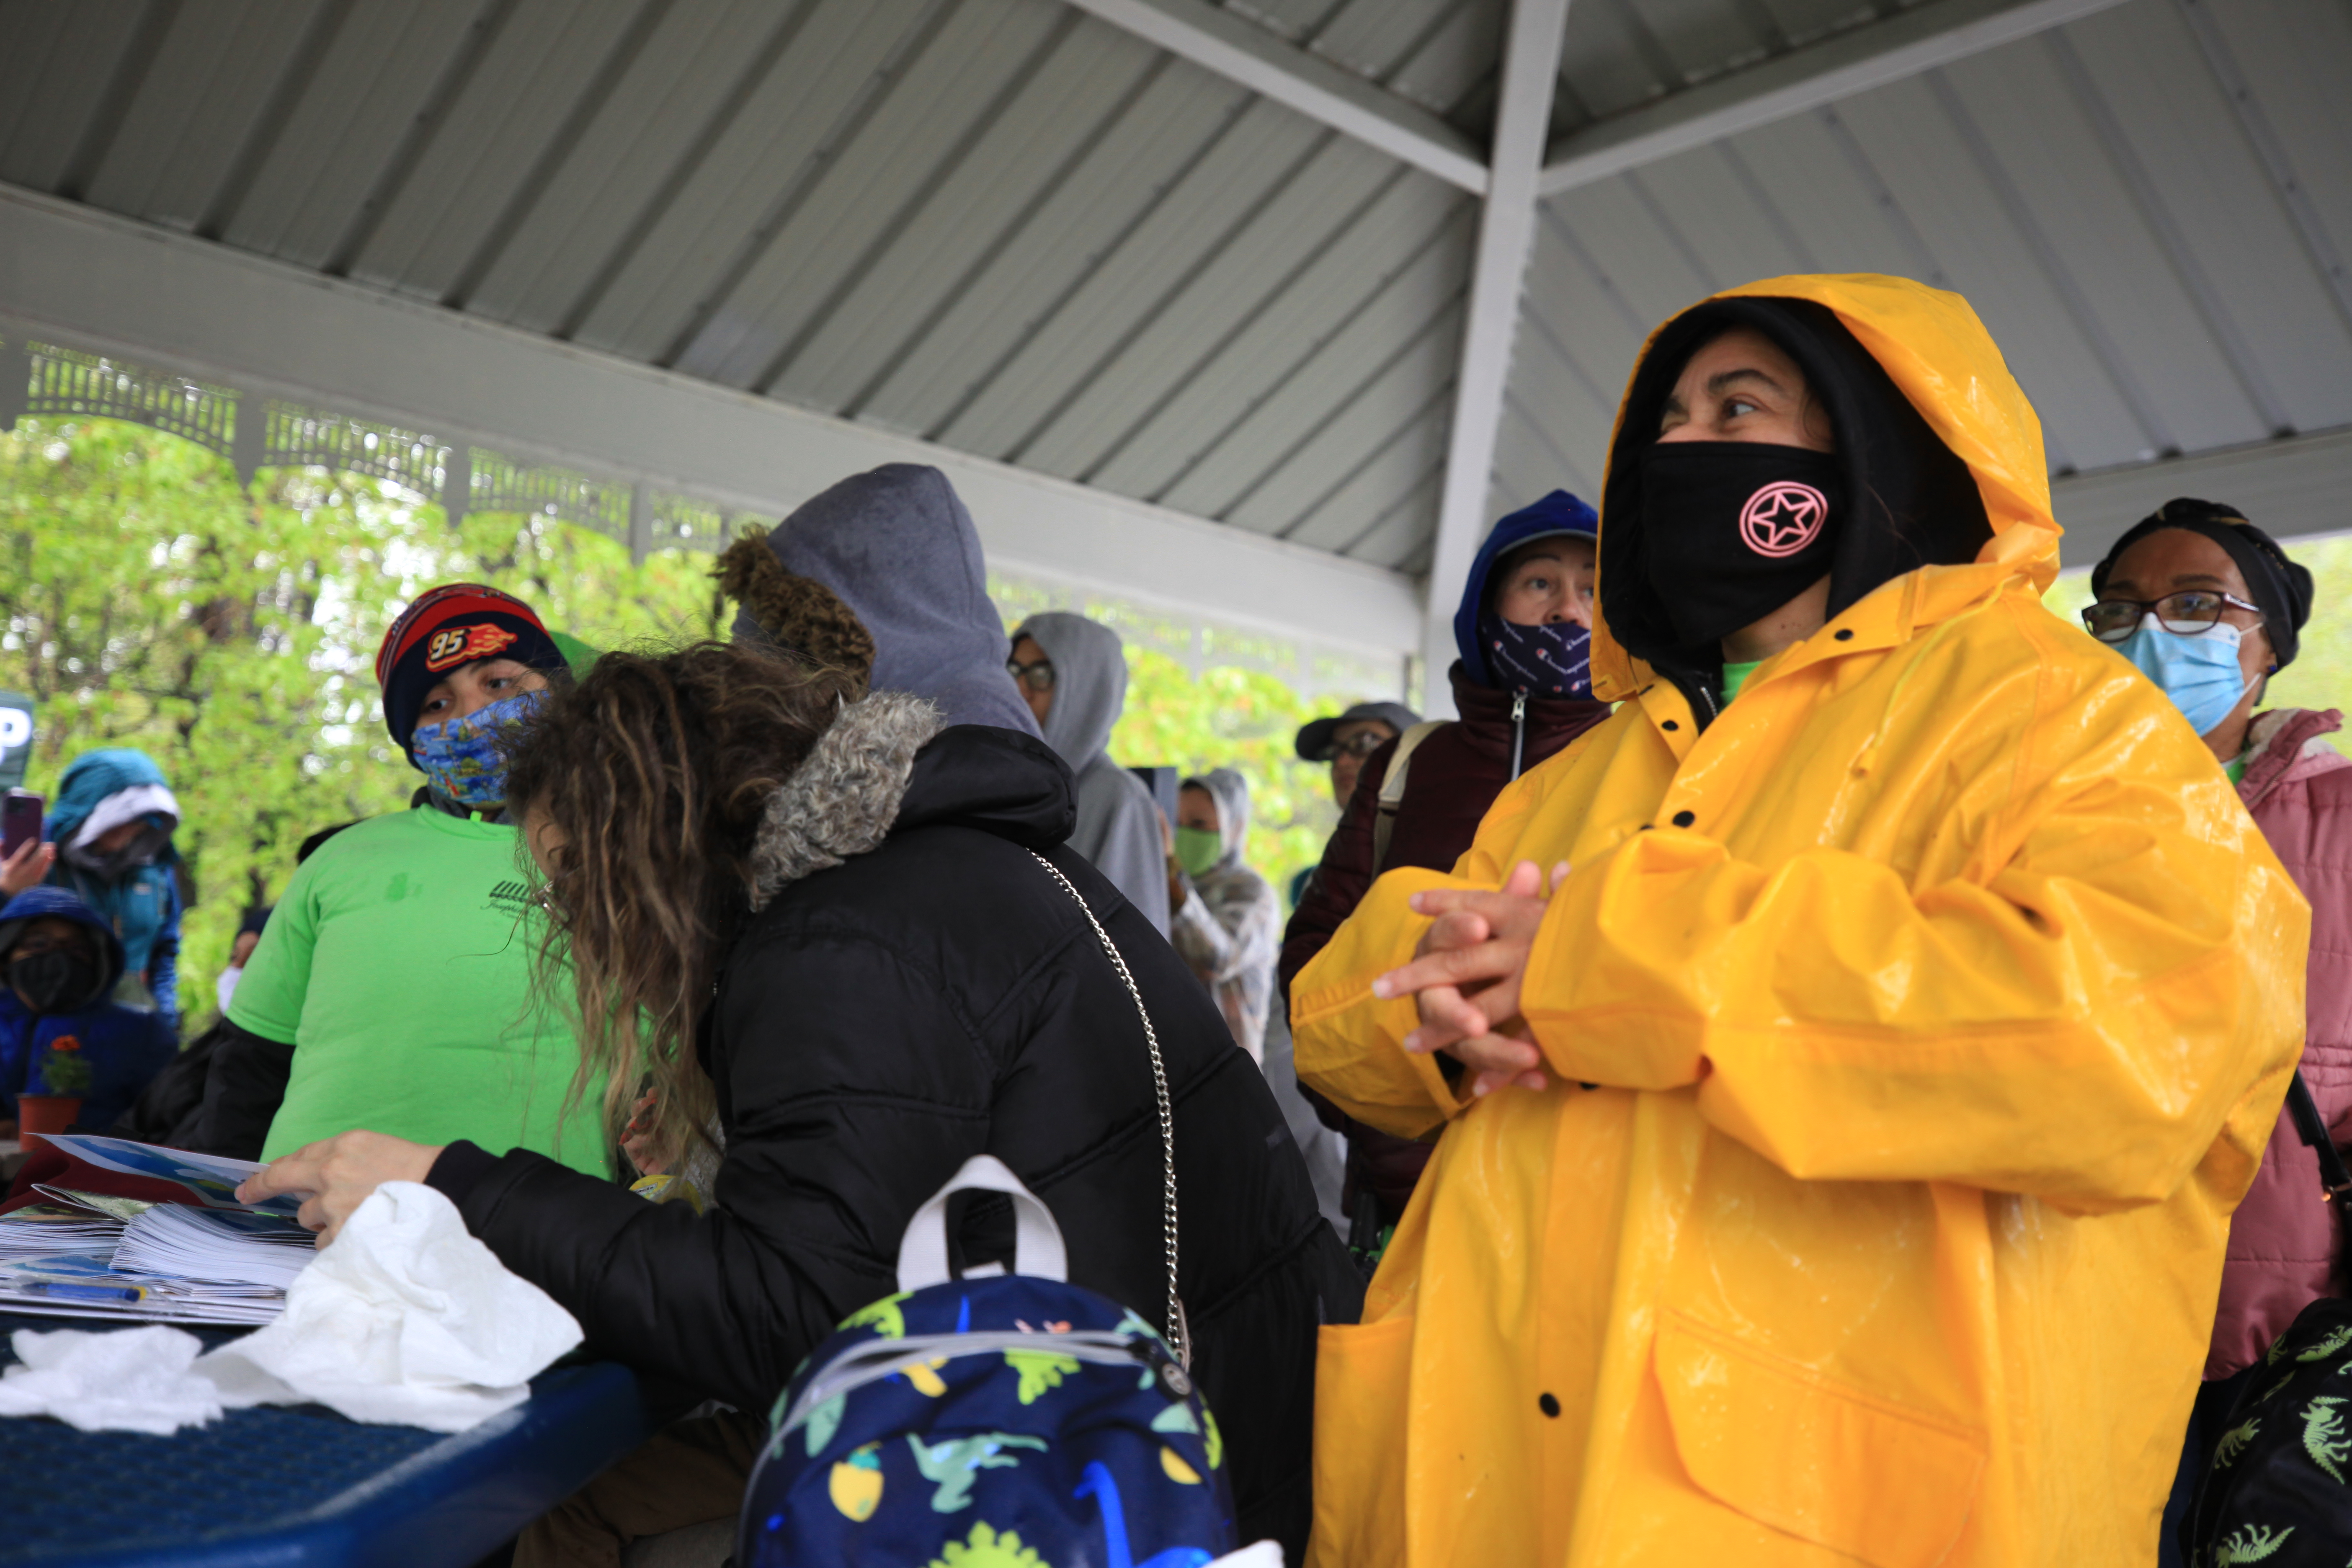 people stand under a pavilion in rain jackets and masks.